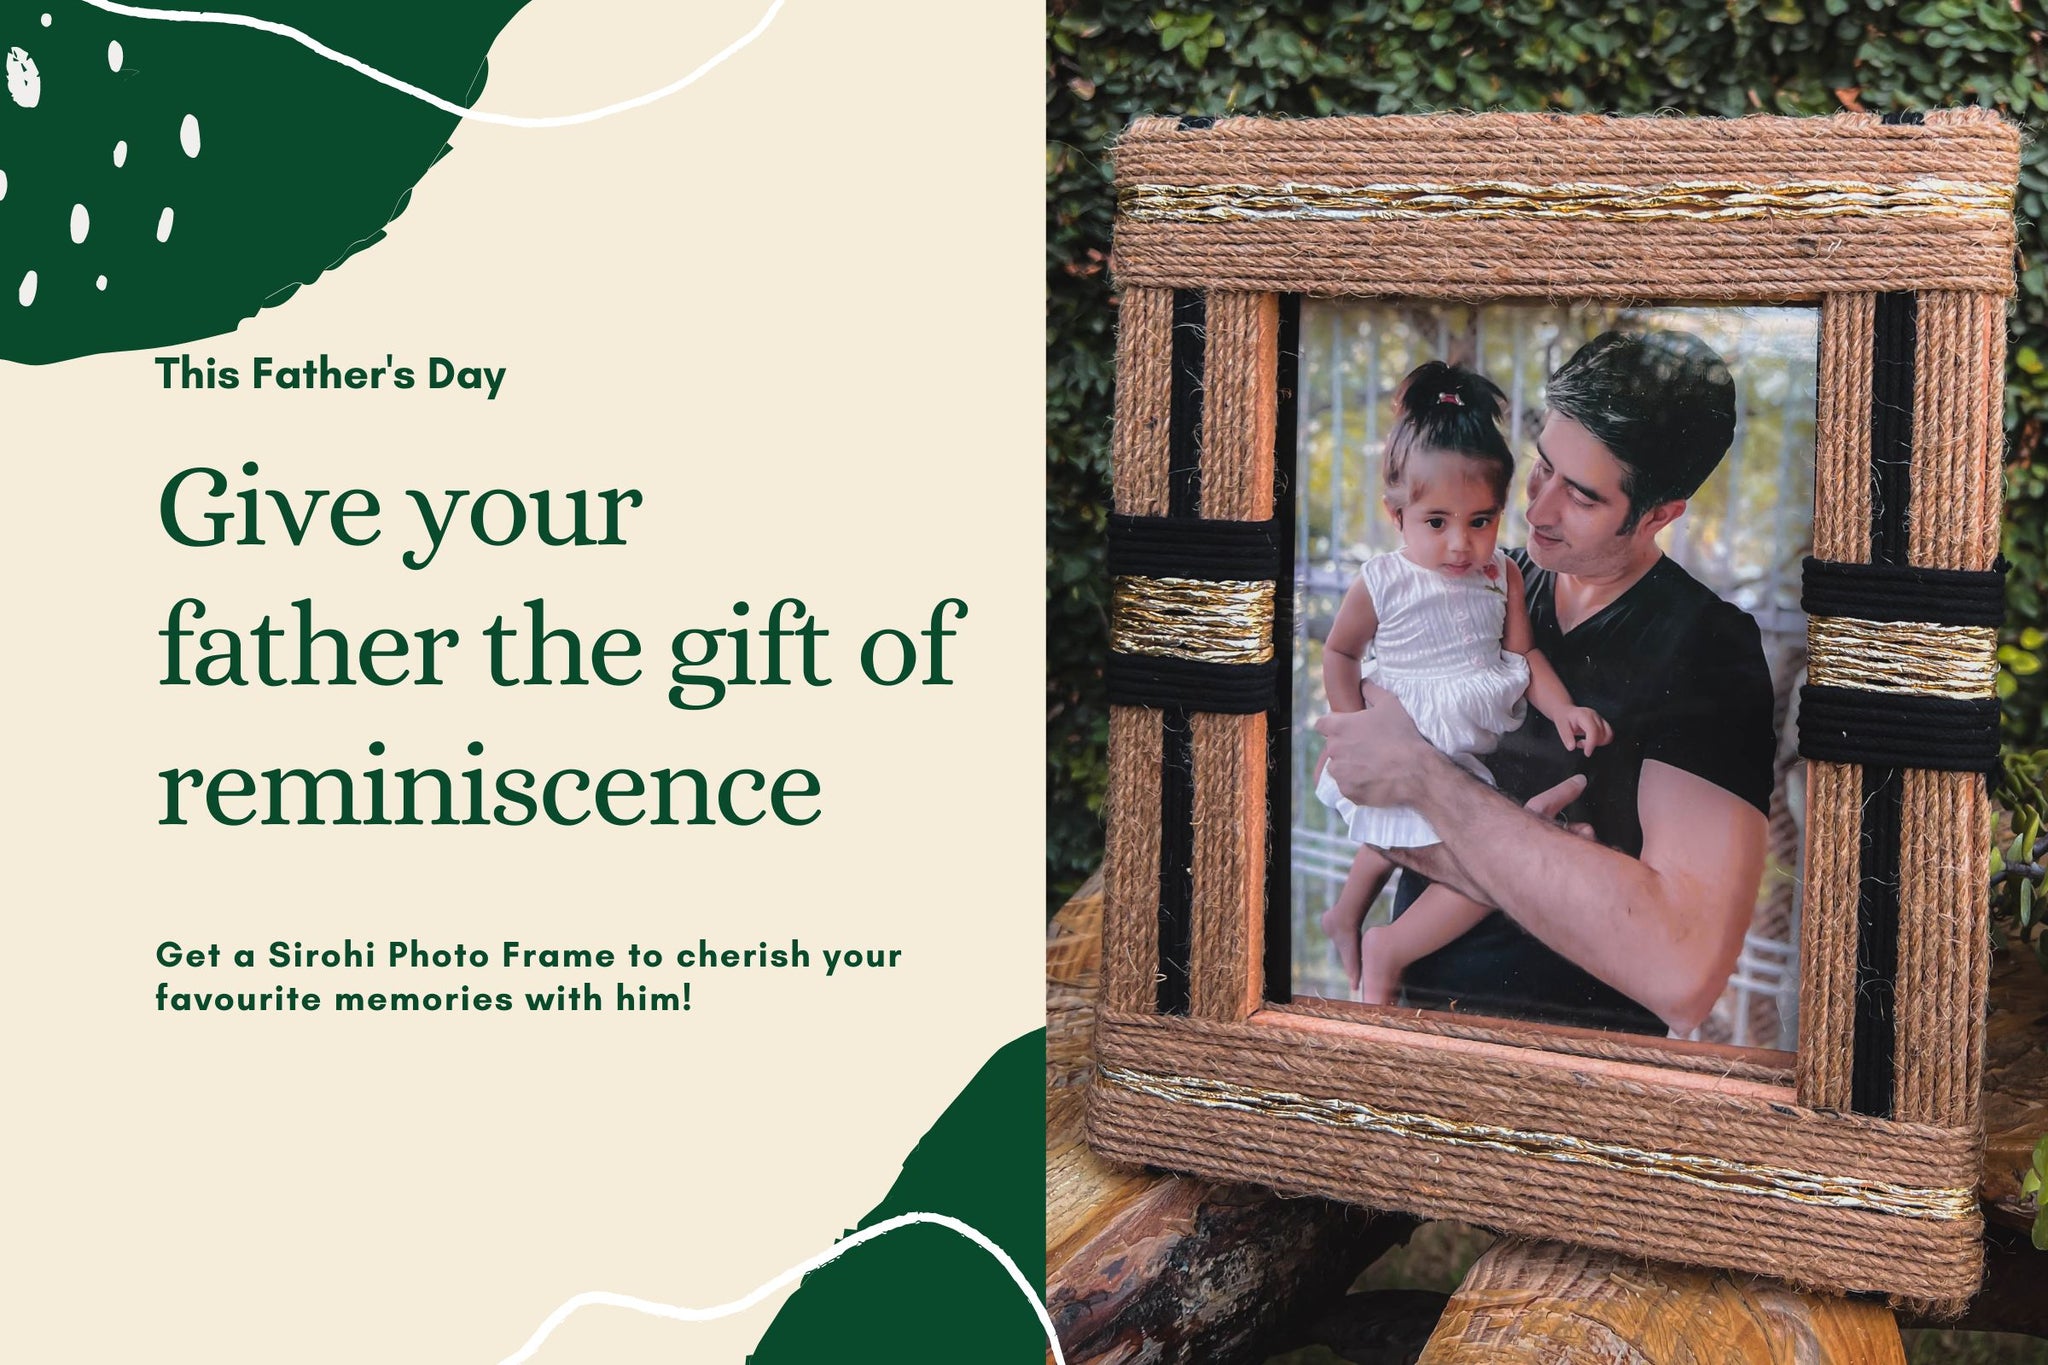 Sirohi photo frames for your favourite memories with your father